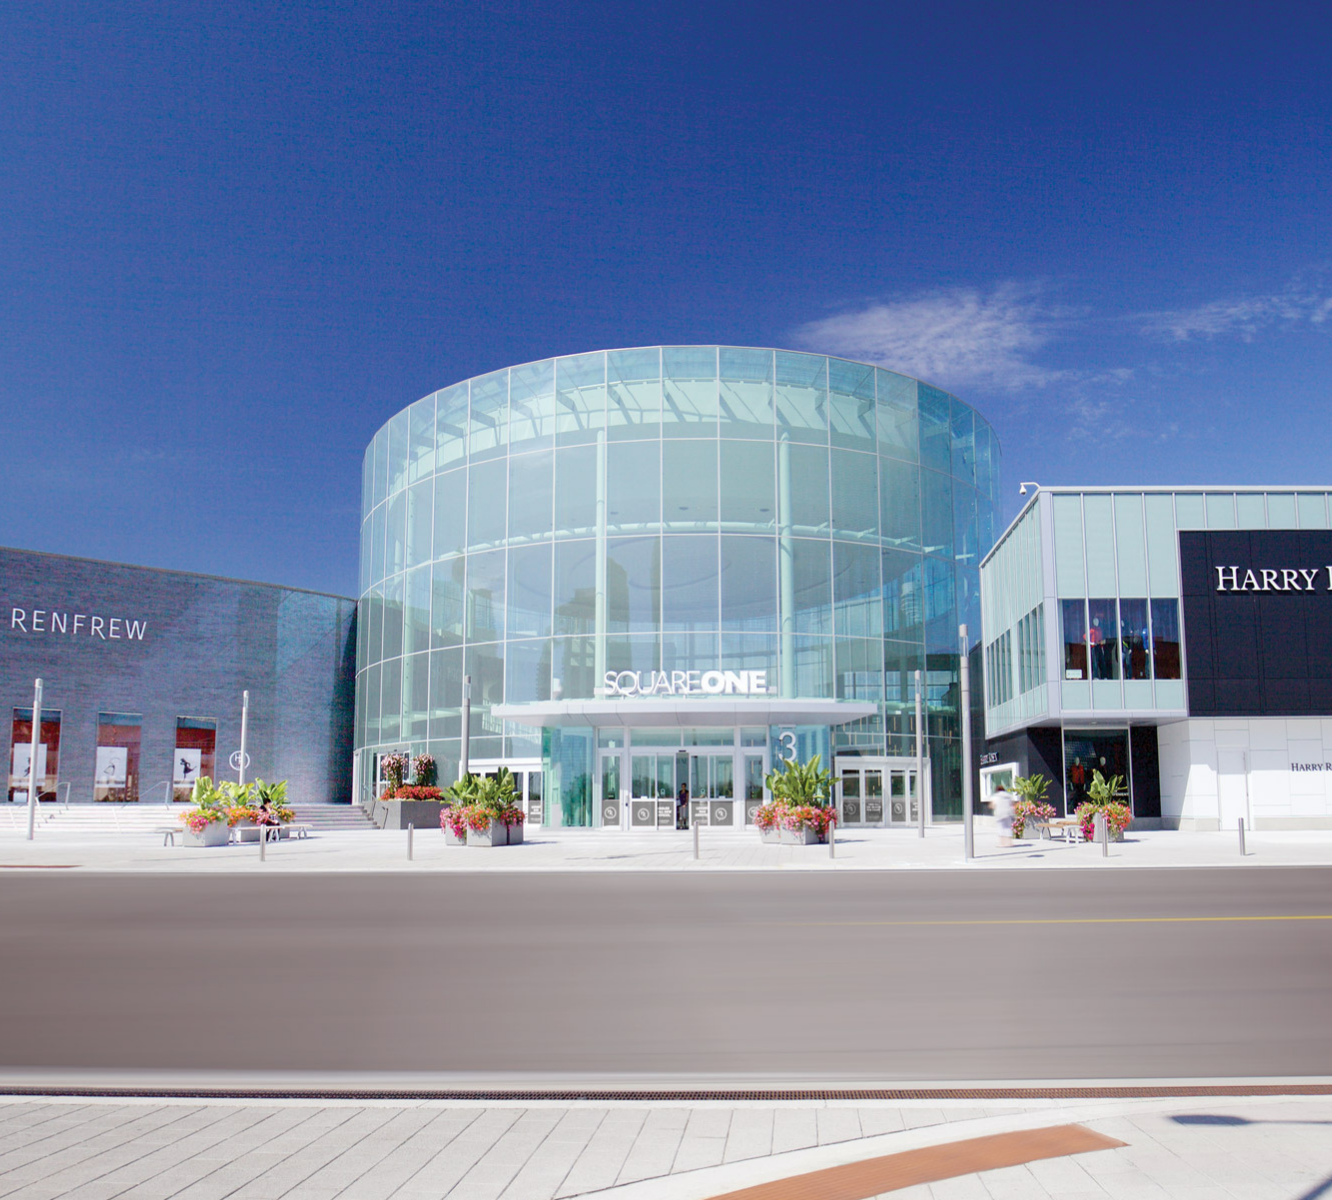 Exterior glass round entrance of Square One shopping centre summer time with bright blue sky.